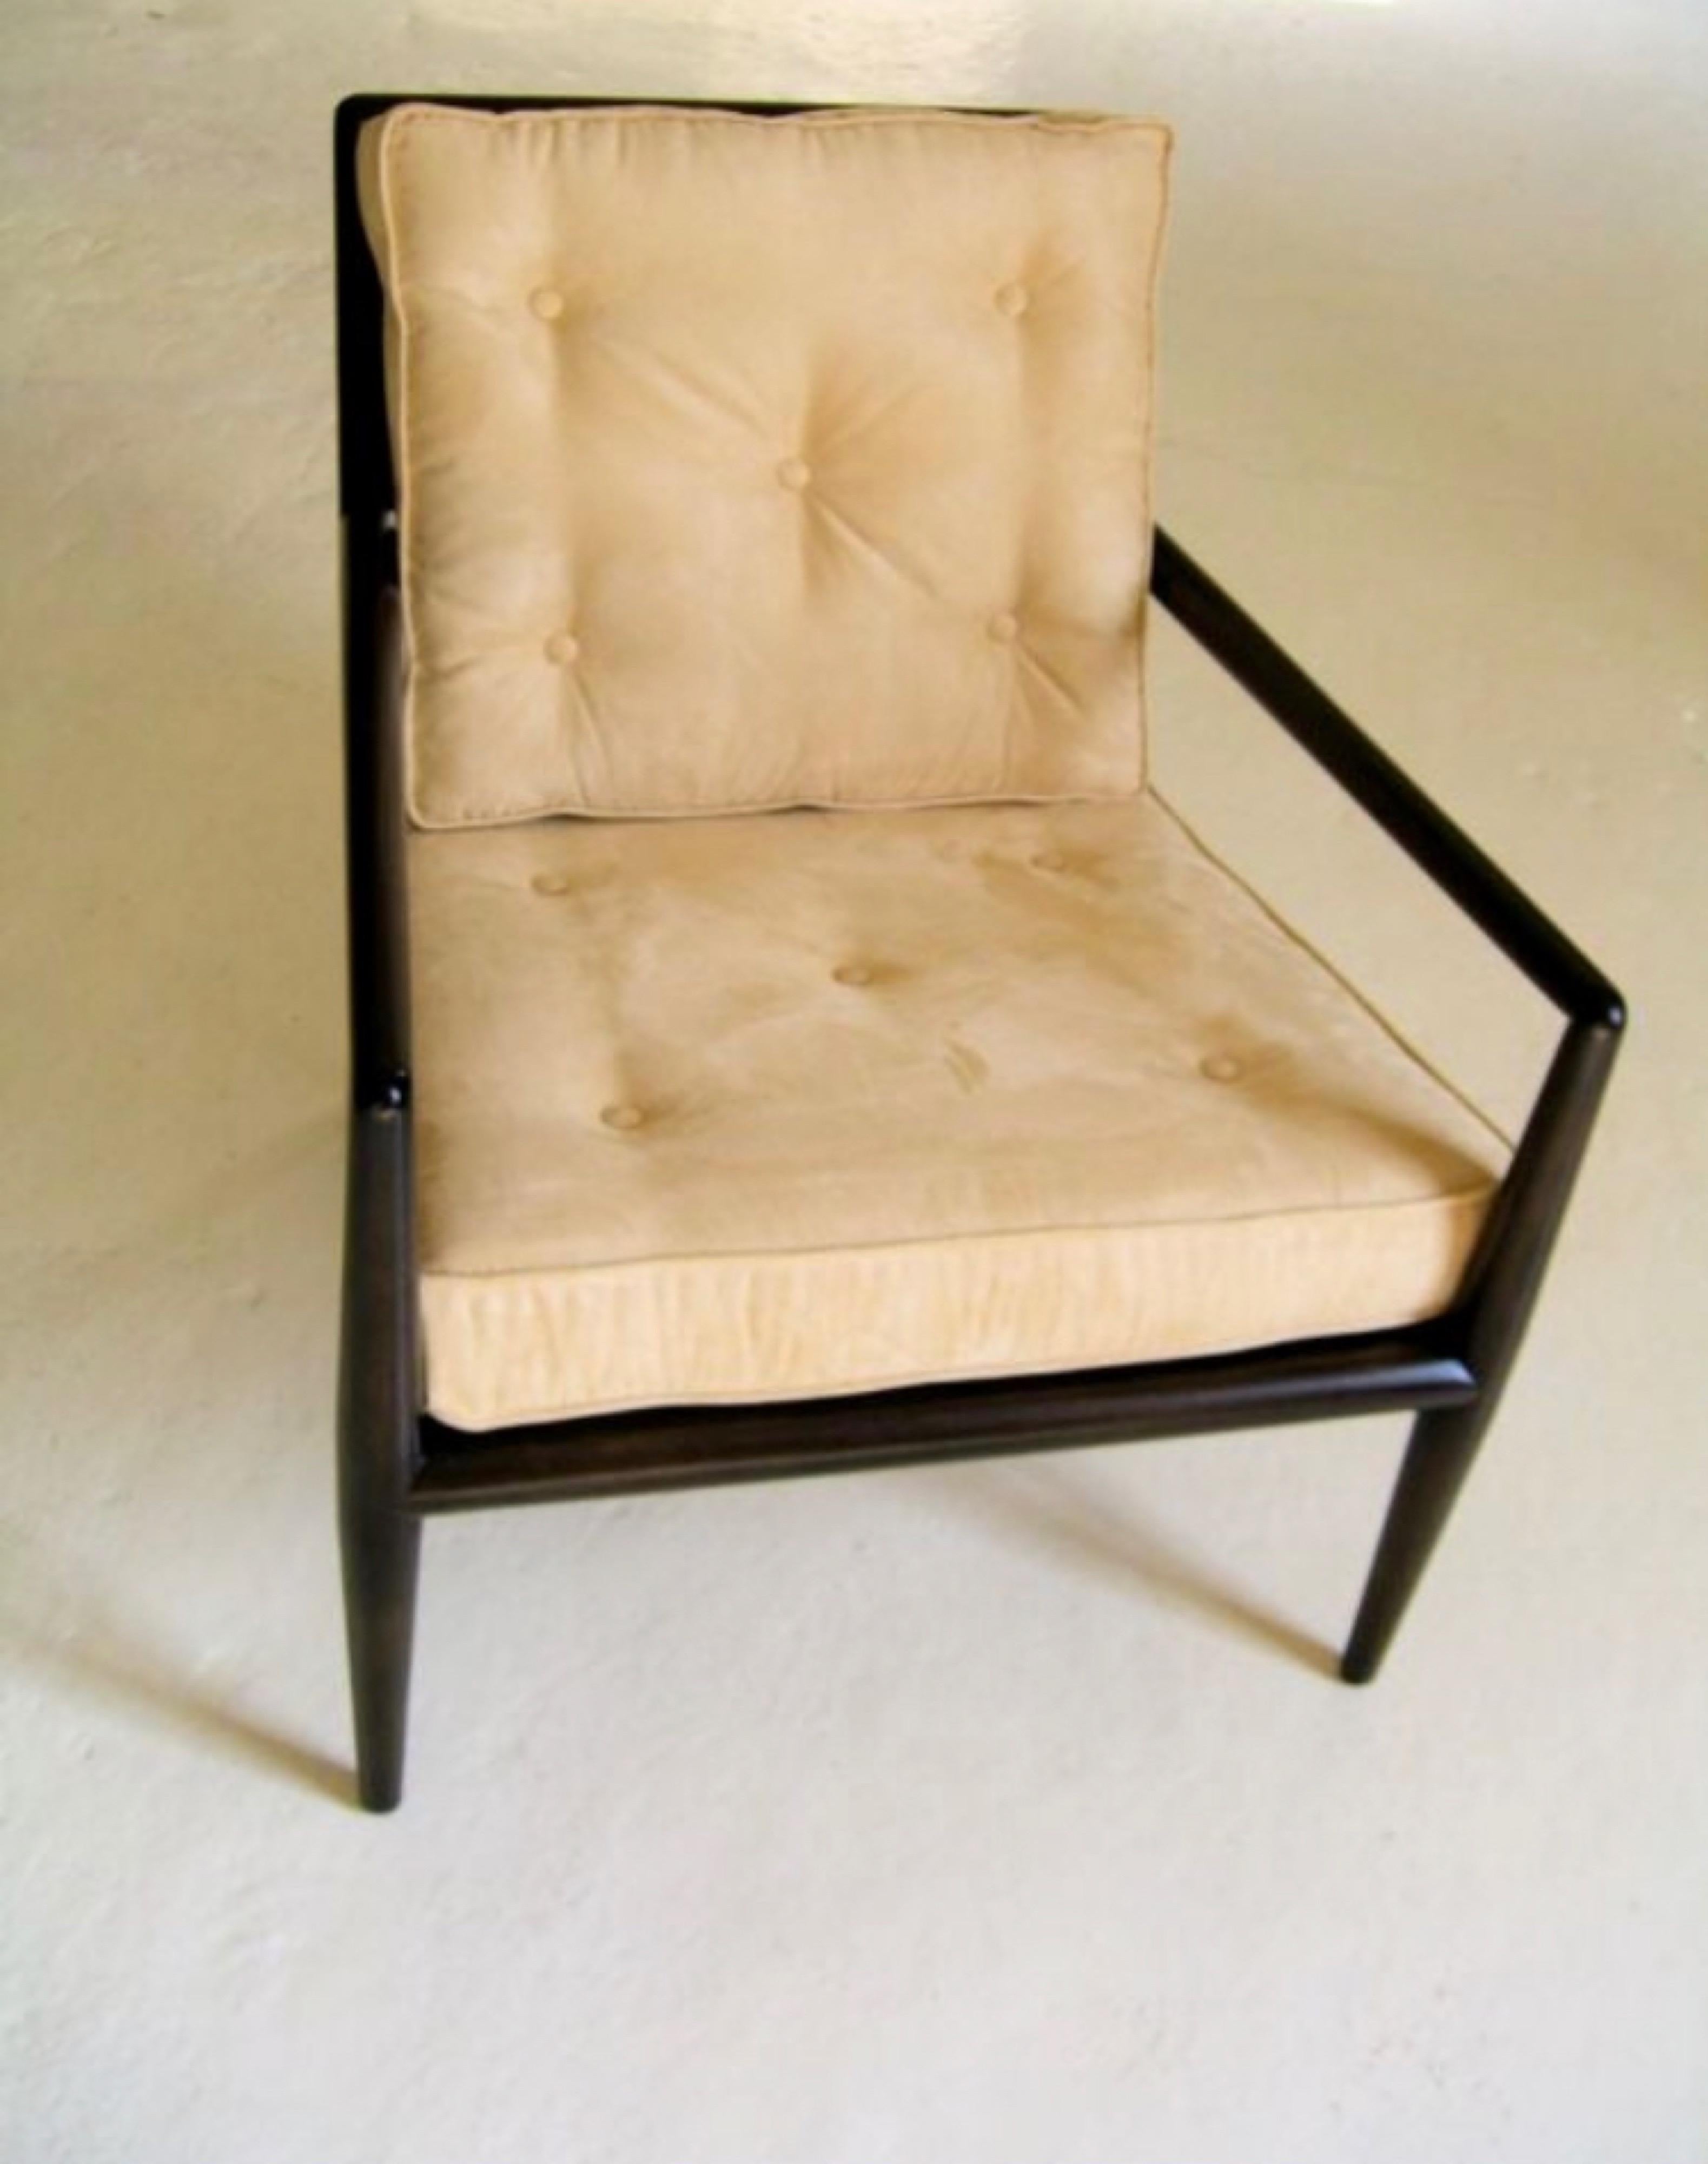 Lounge chair by Terrence Harold Robsjohn Gibbings for Widdicomb, walnut dowel frame, slate back with open wood arms and loose seat cushions. Price includes refinishing and reupholstering C.O.M. Want to see more beautiful things? Scroll down below